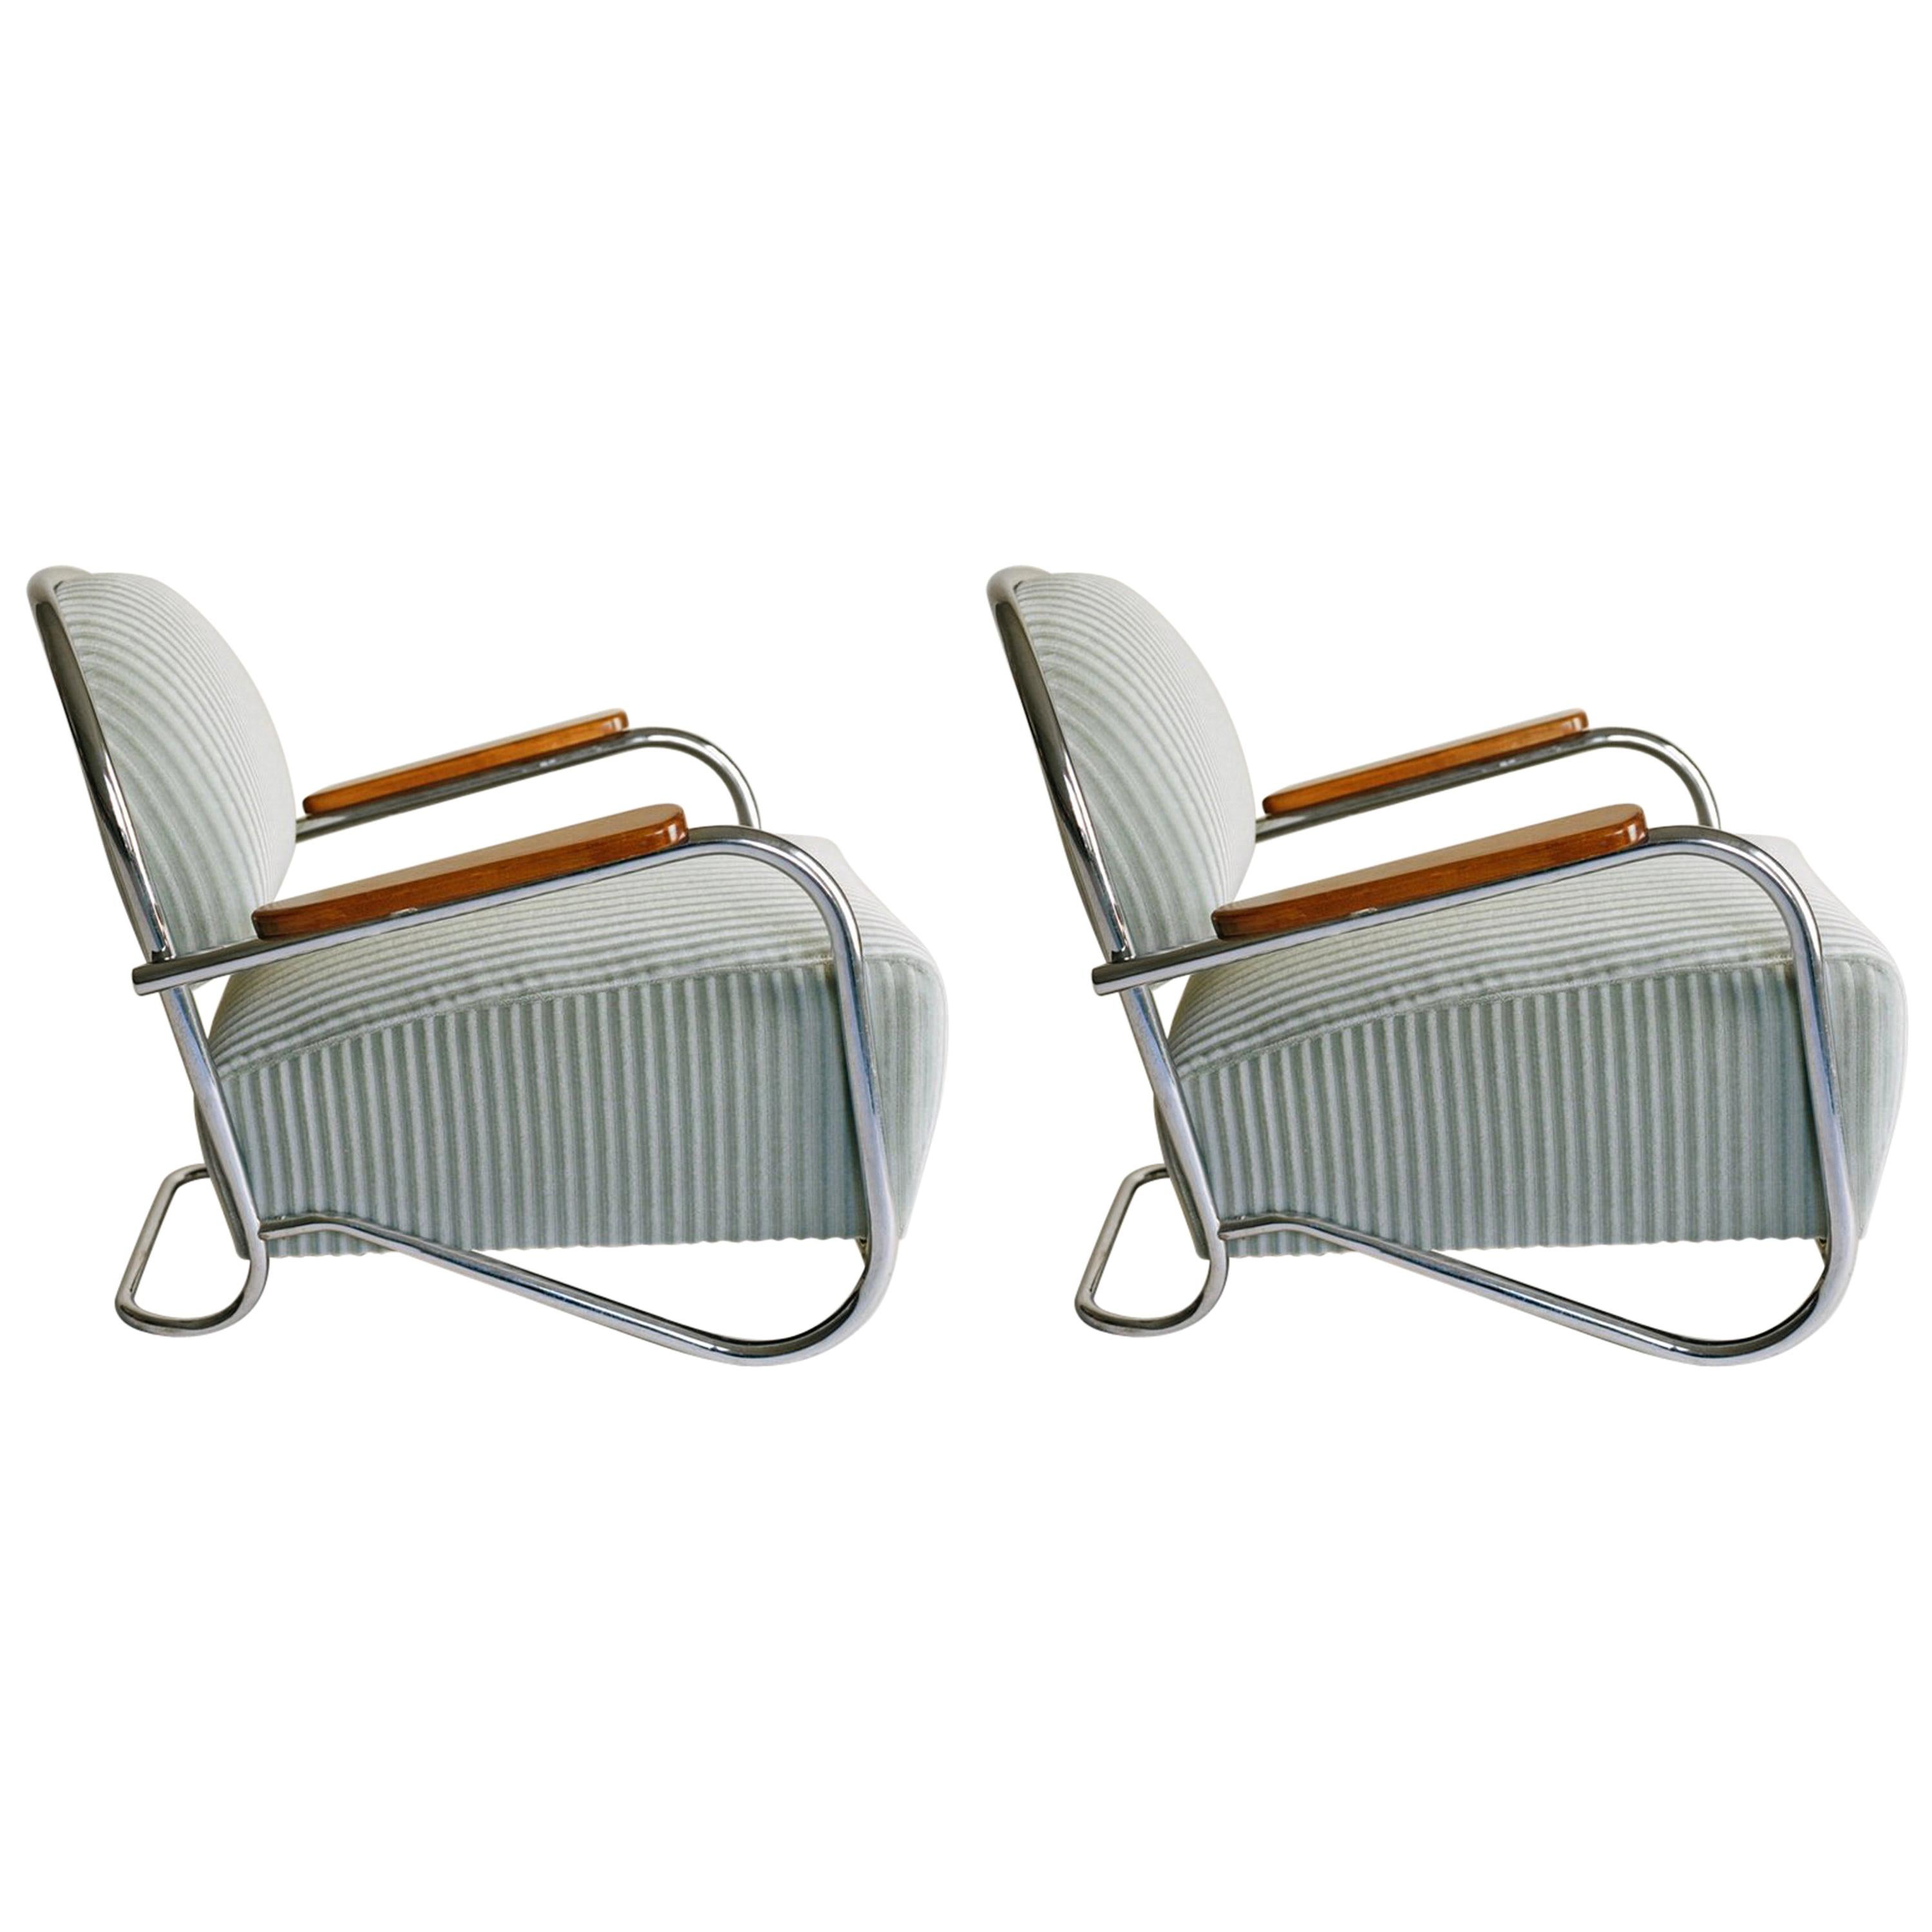 K.E.M. Weber, Pair of Lounge Chairs, 1934